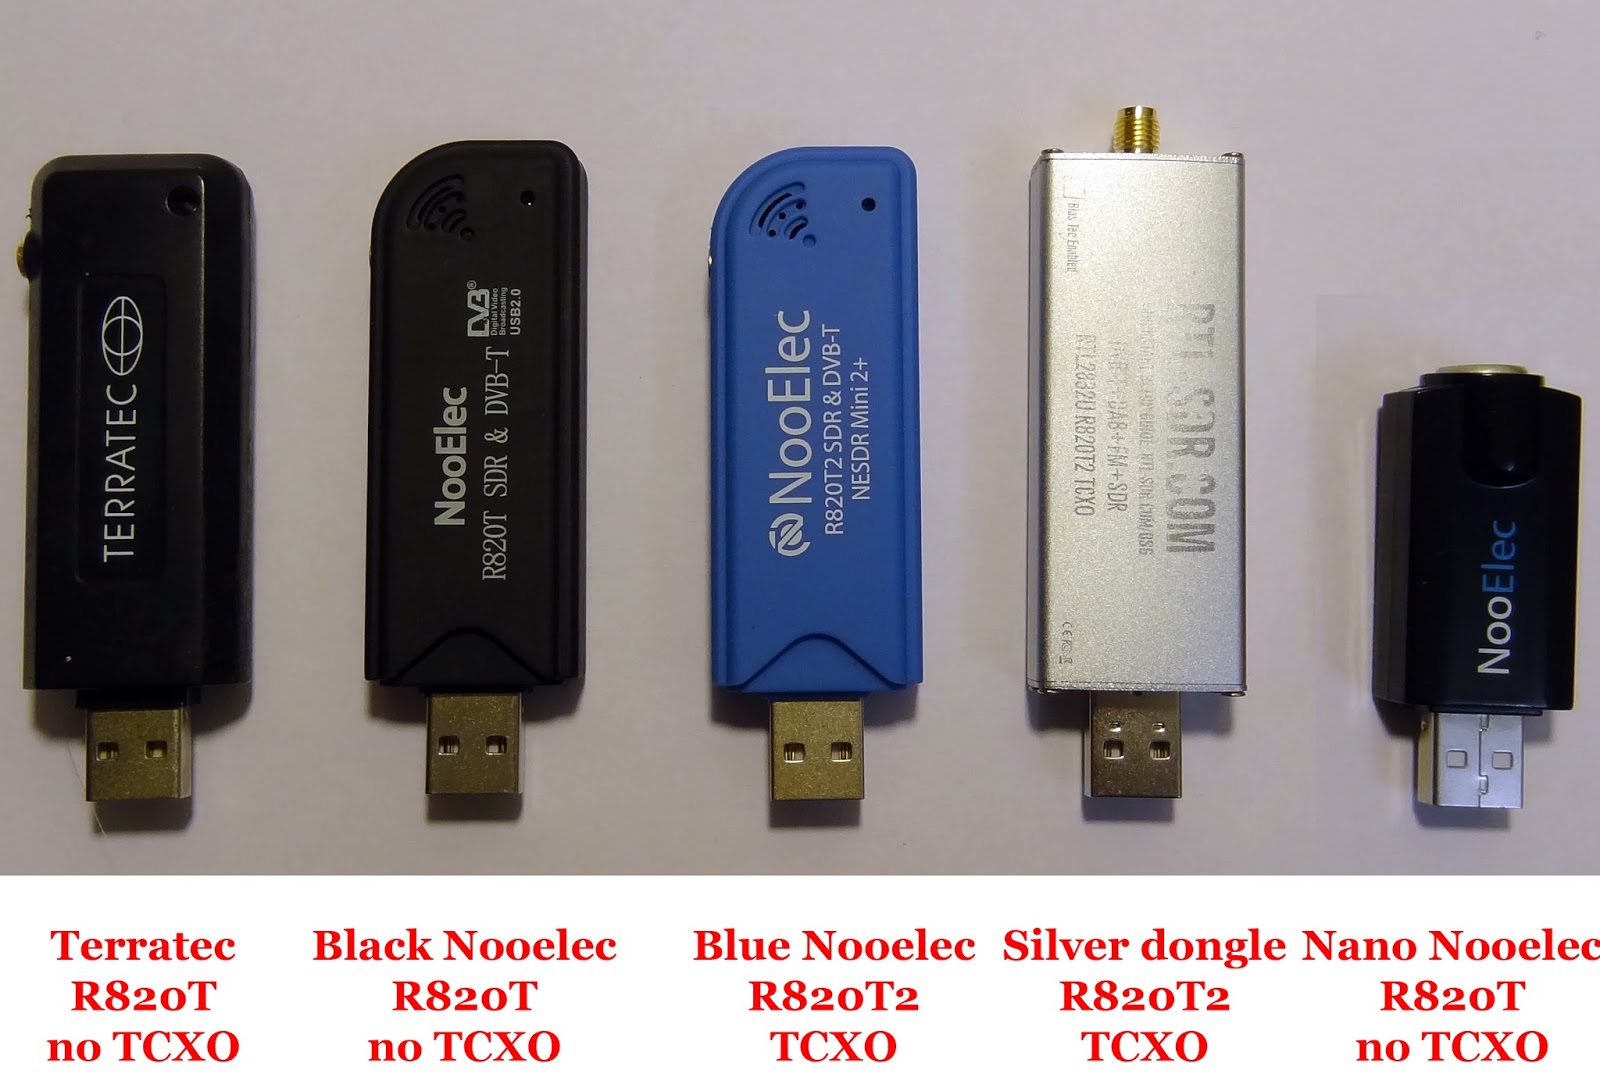 RTL-SDR Releases New V4 USB Dongle 